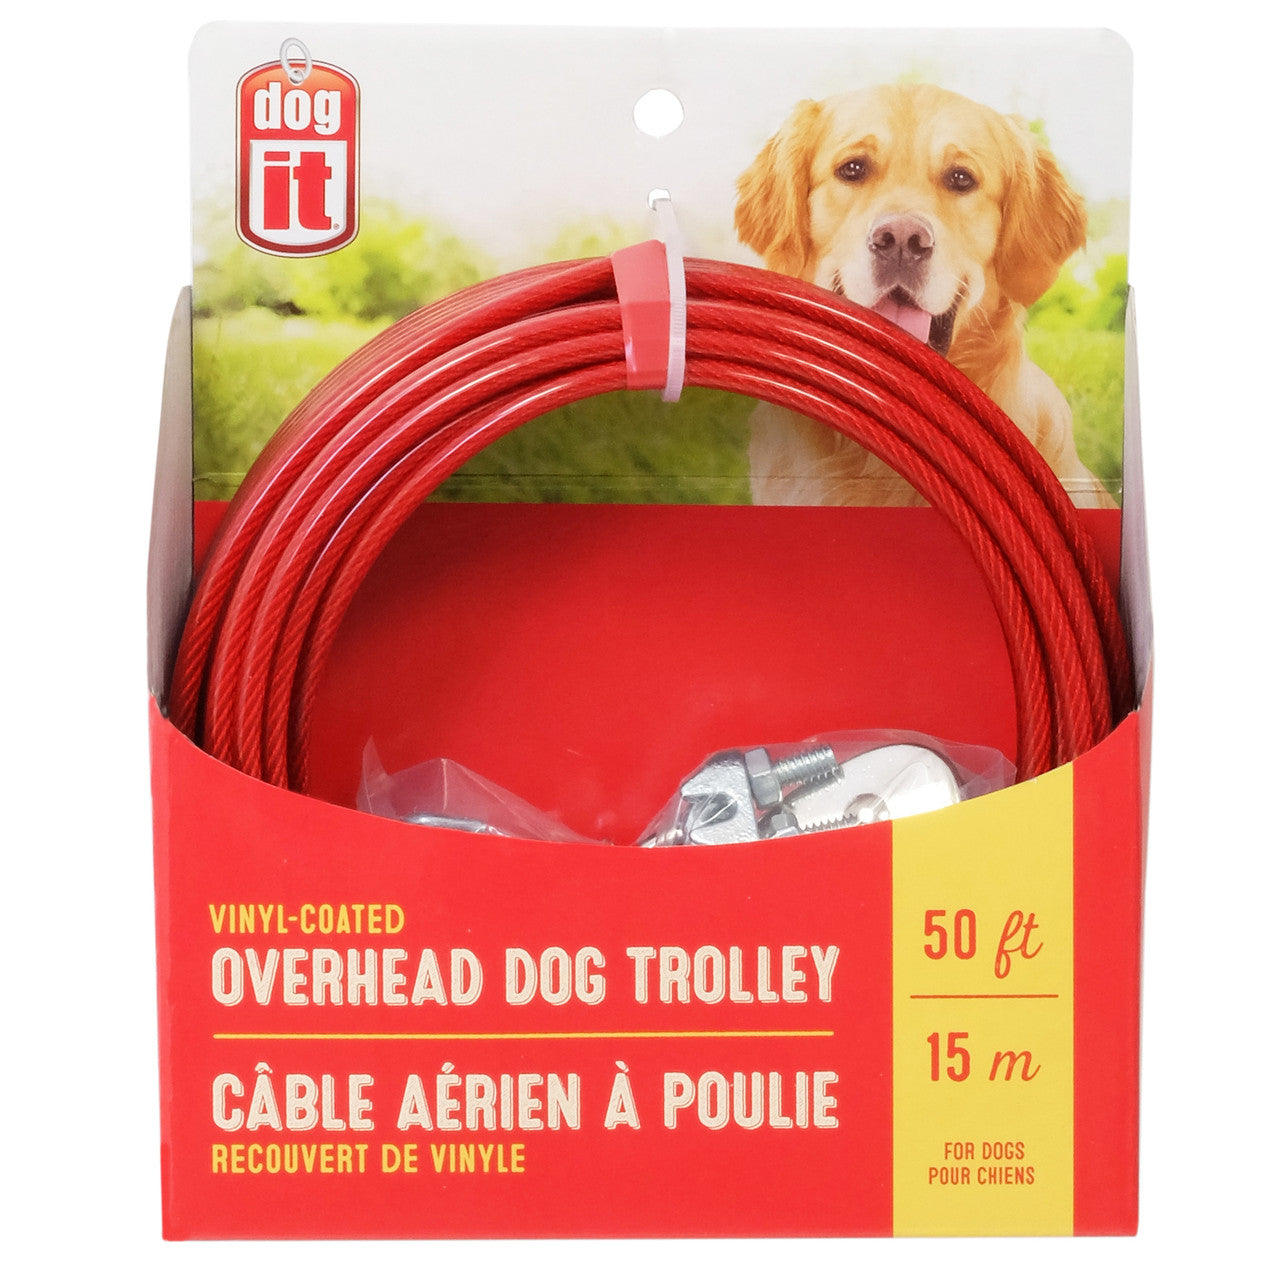 Dogit Overhead Dog Trolley, 50', Red 022517717998